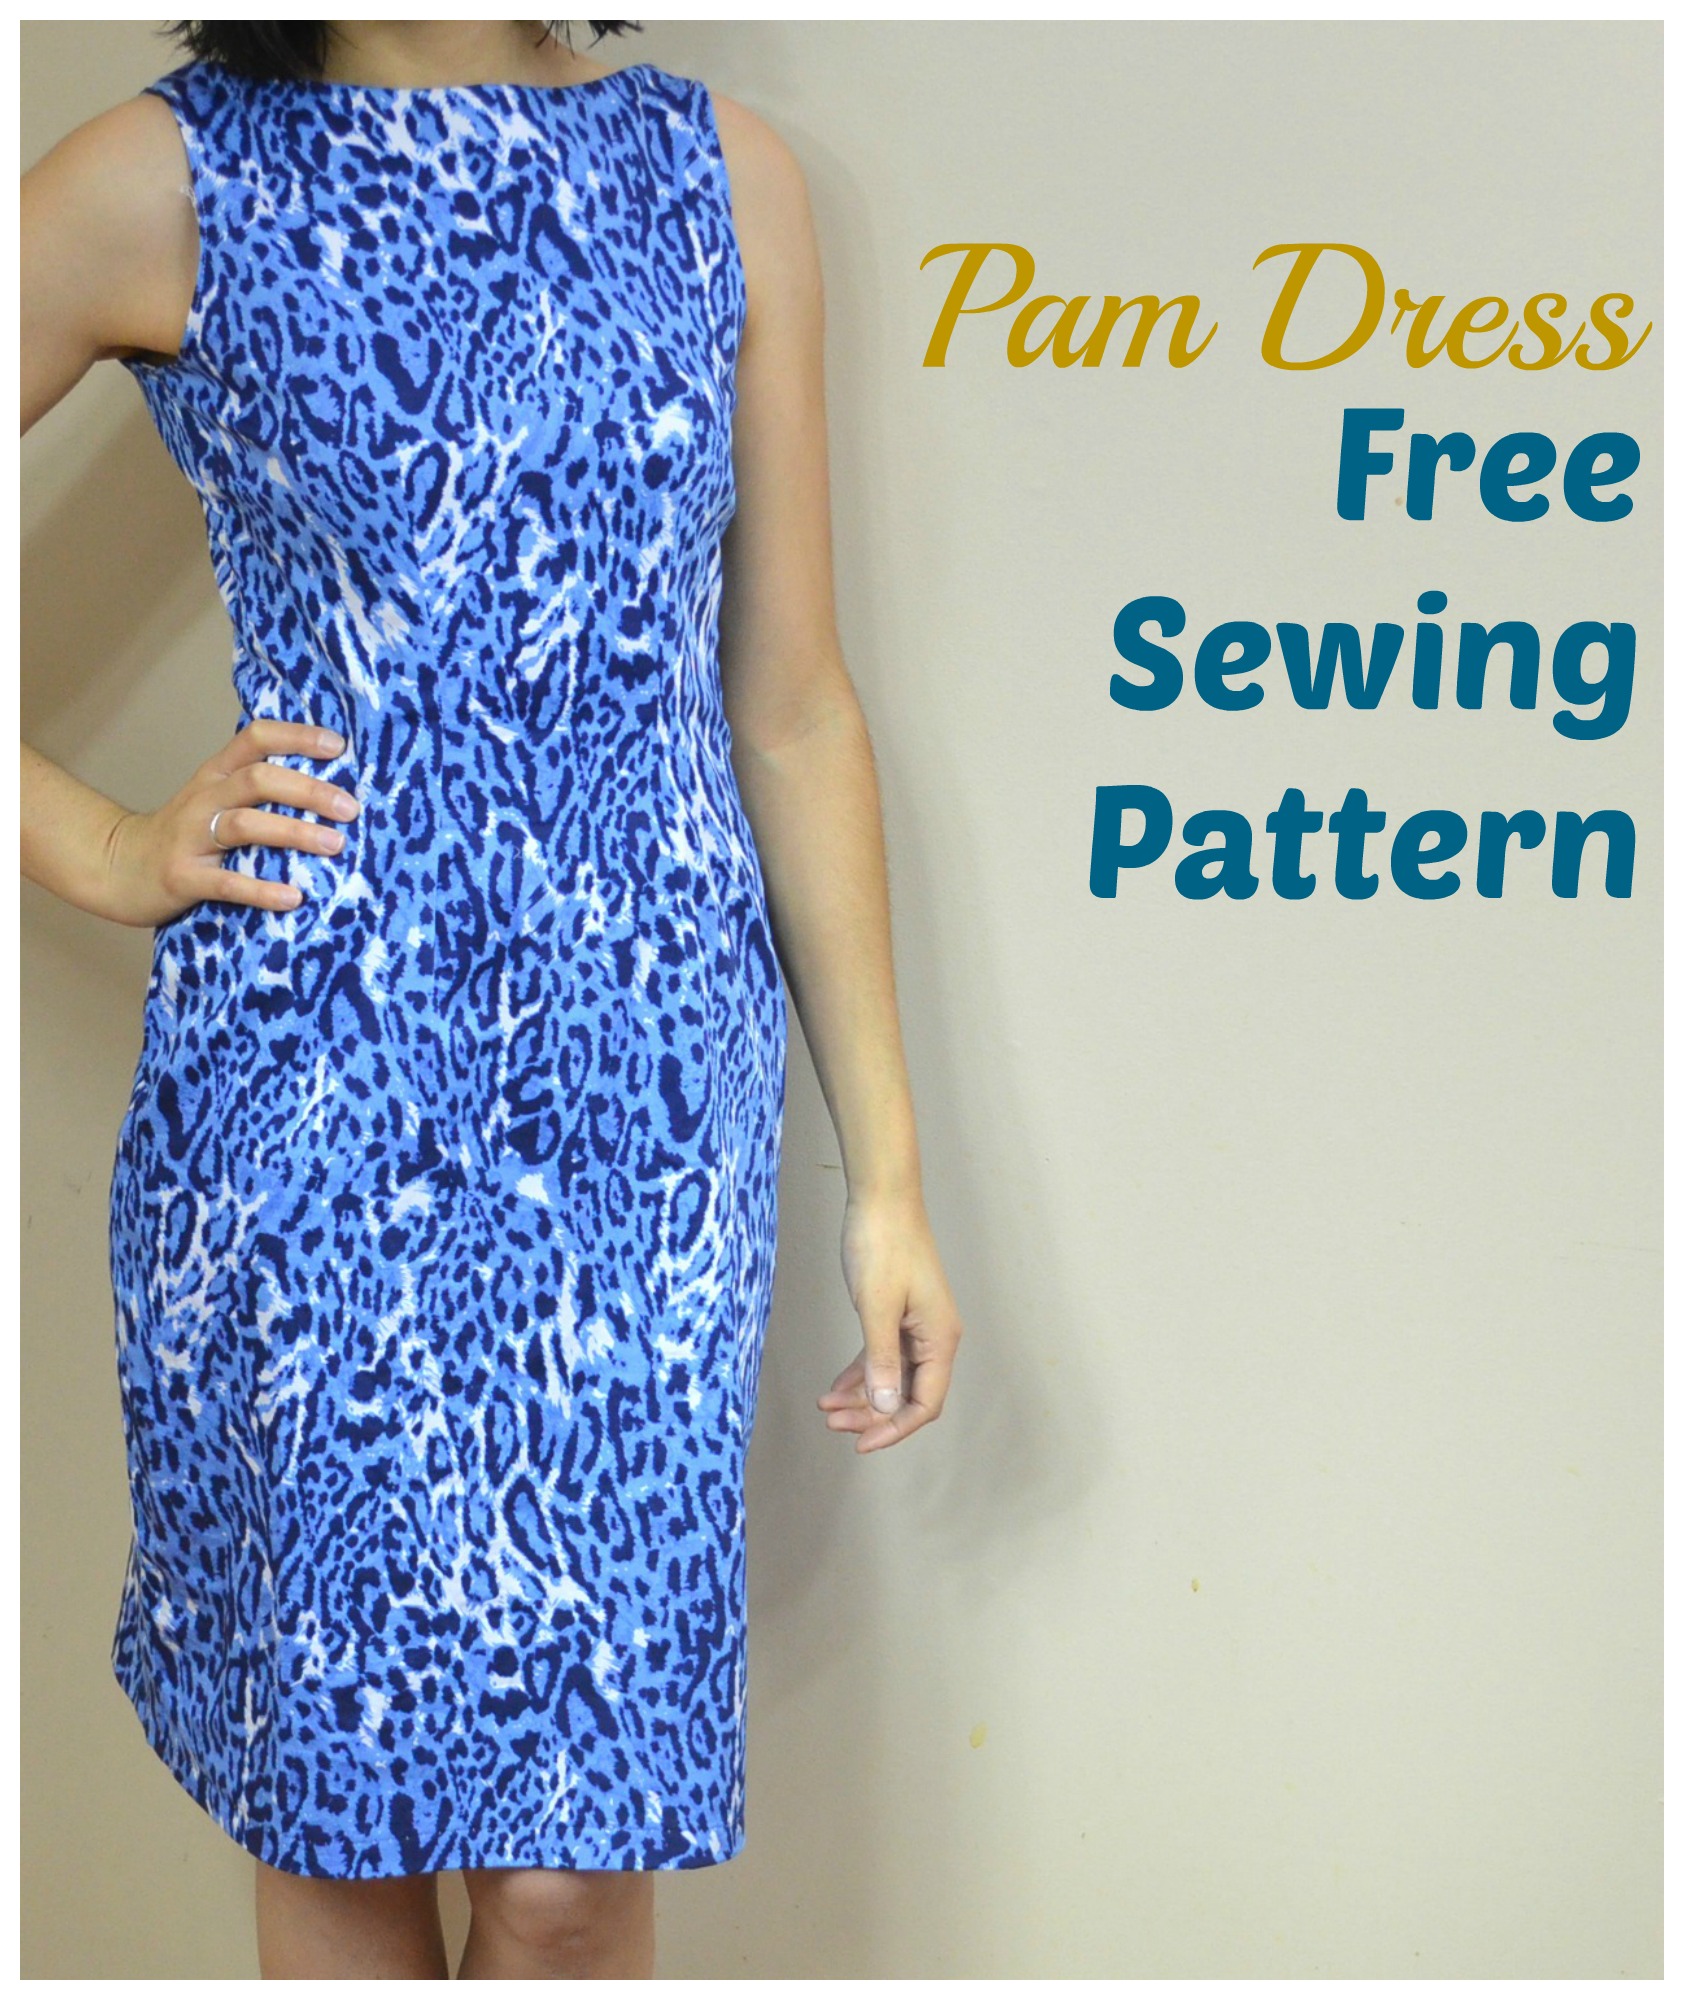 pam-dress-free-sewing-pattern-sewing-projects-burdastyle